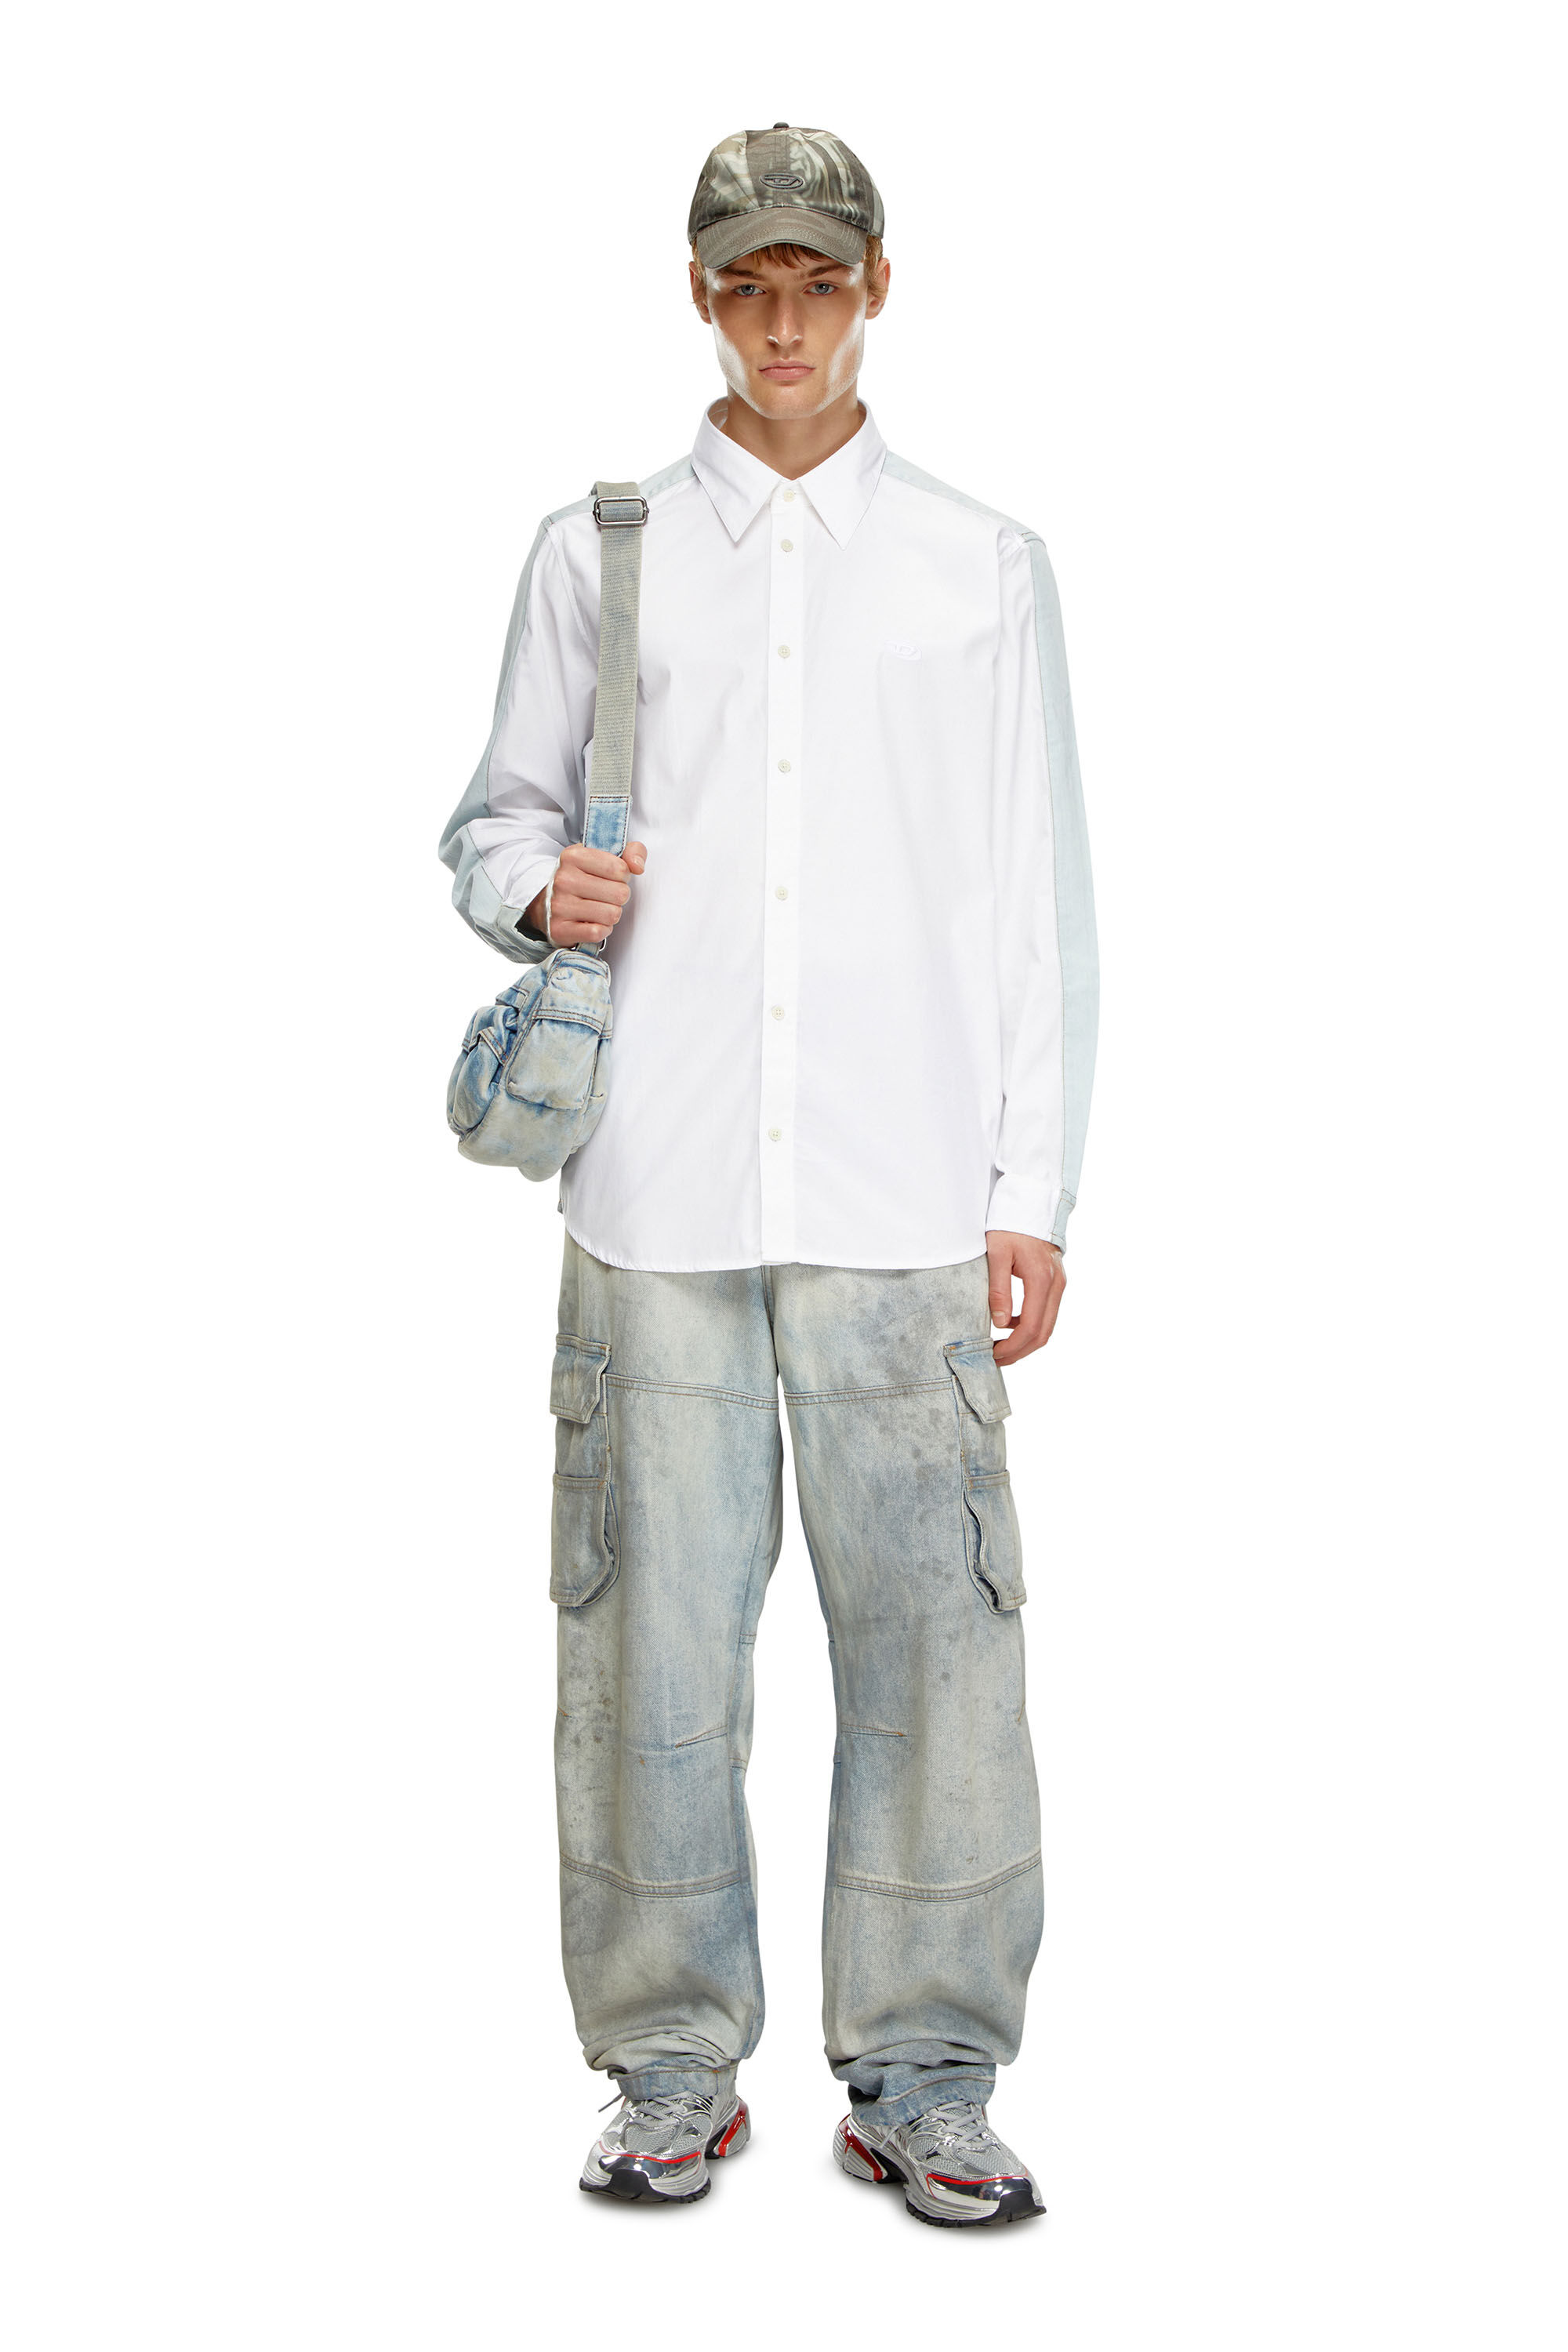 Diesel - S-SIMPLY-DNM, Man Shirt in cotton poplin and denim in Multicolor - Image 1